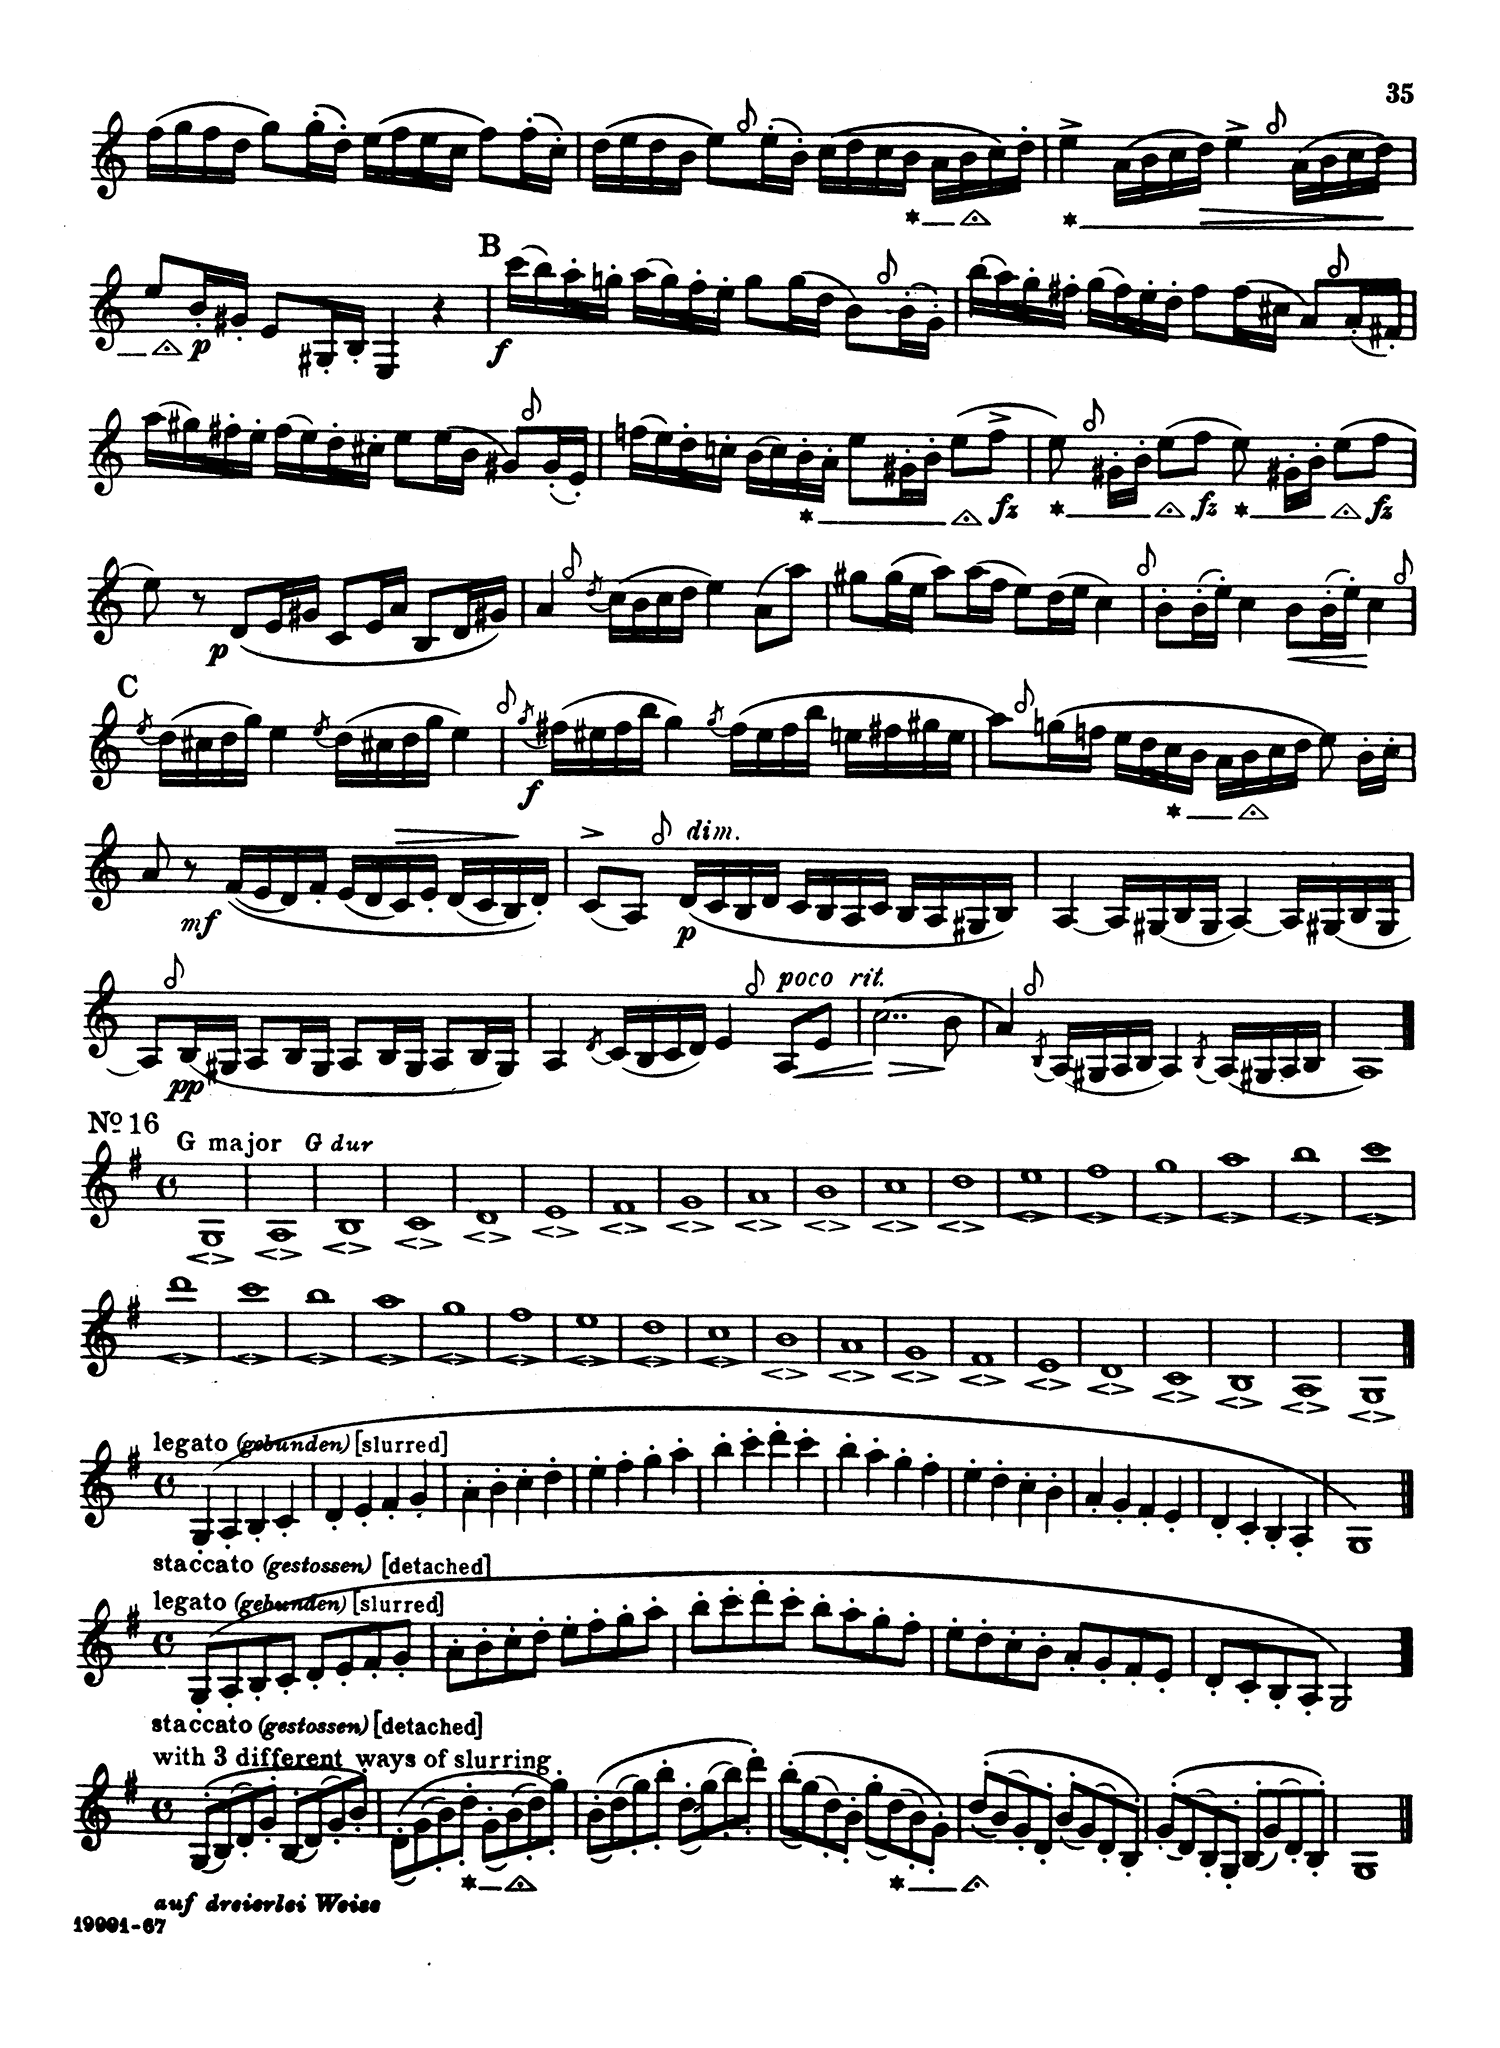 Clarinet Method, Op. 63, Divisions 1 & 2 Page 35